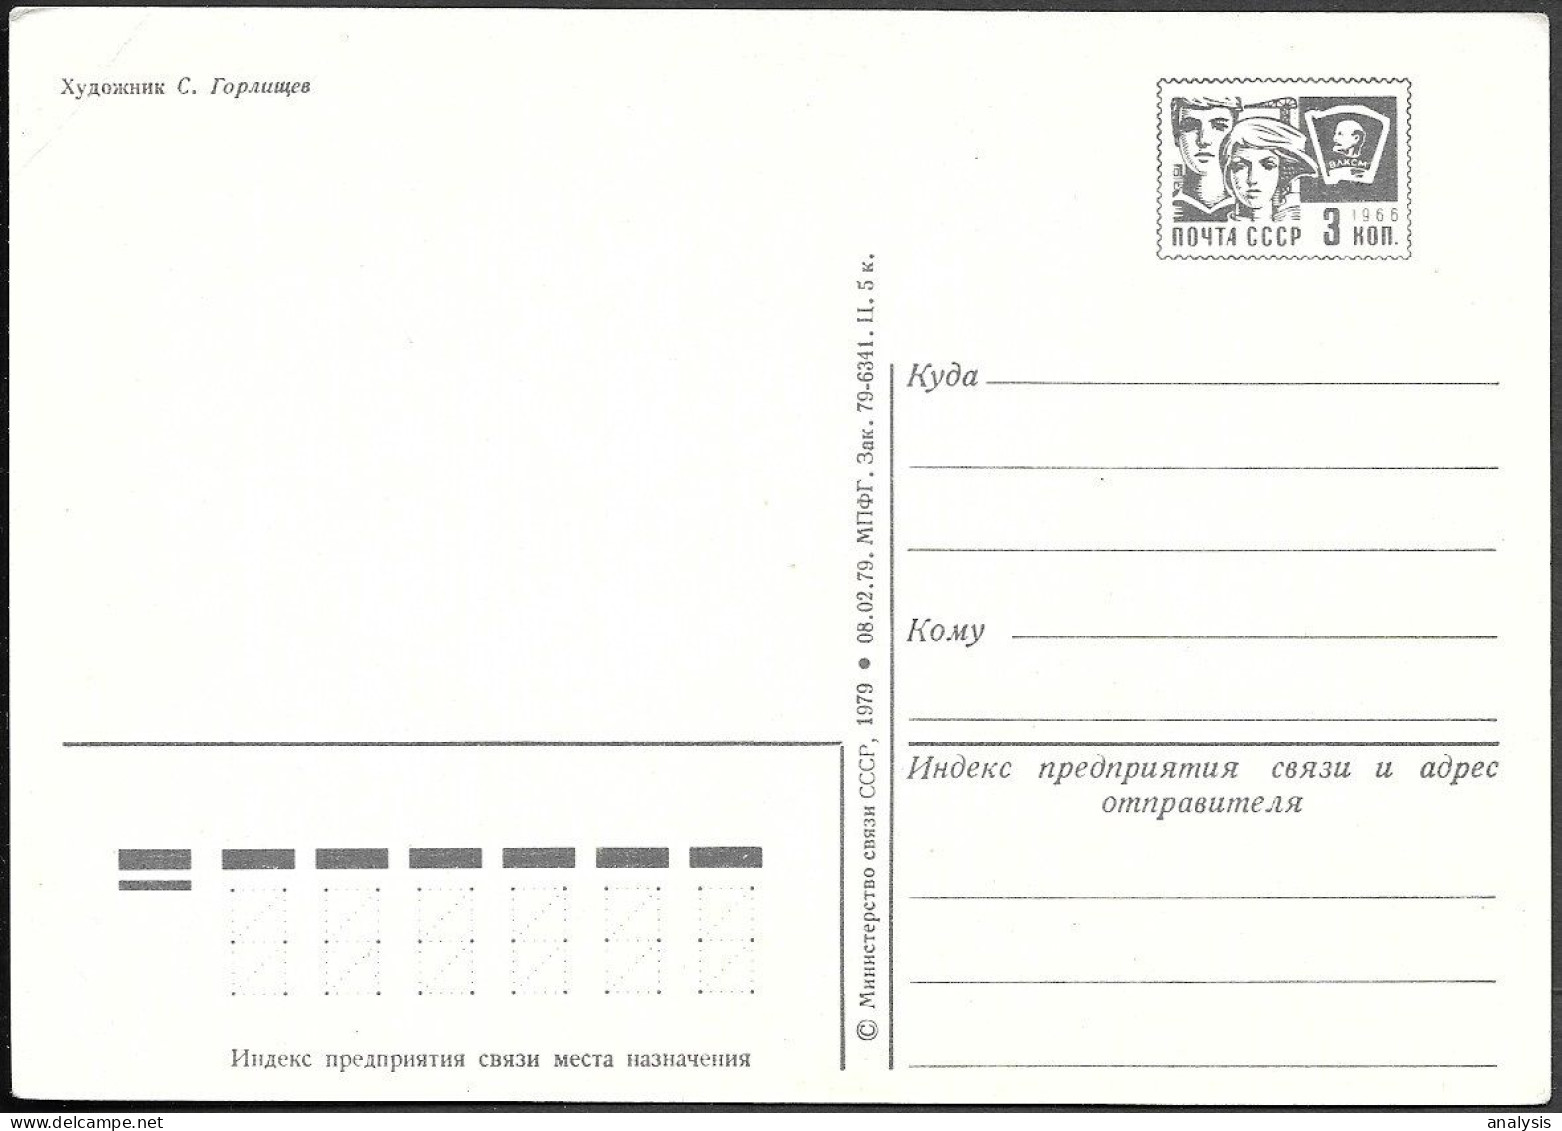 Russia 3K Picture Postal Stationery Card 1979 Unused. New Year Christmas Greetings Santa Claus Arctic North Pole Ship - 1970-79